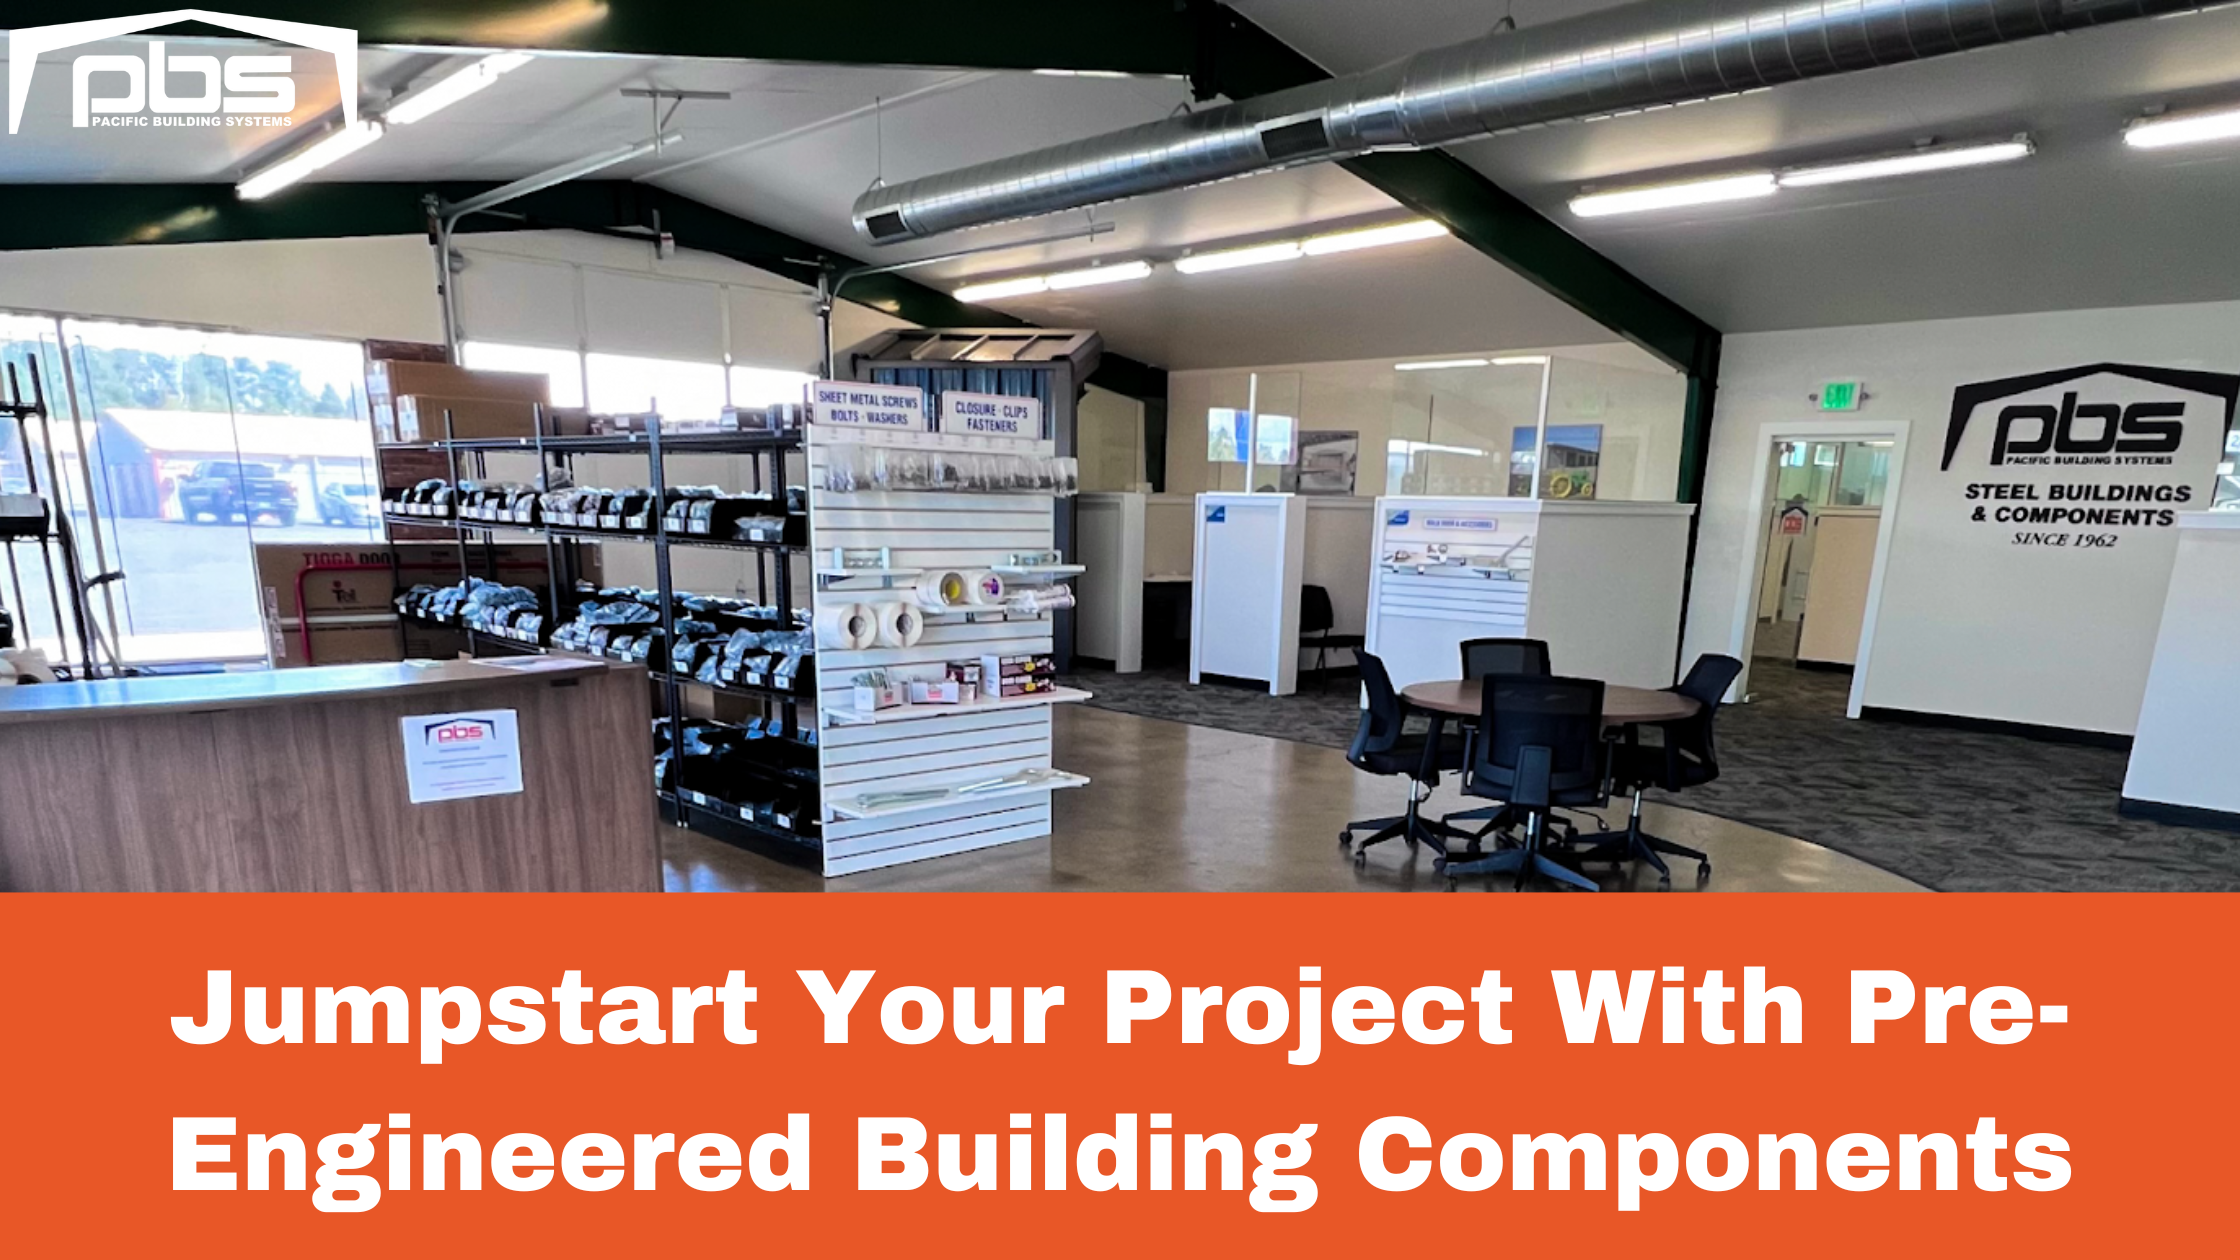 Jumpstart Your Project With Pre-Engineered Building Components